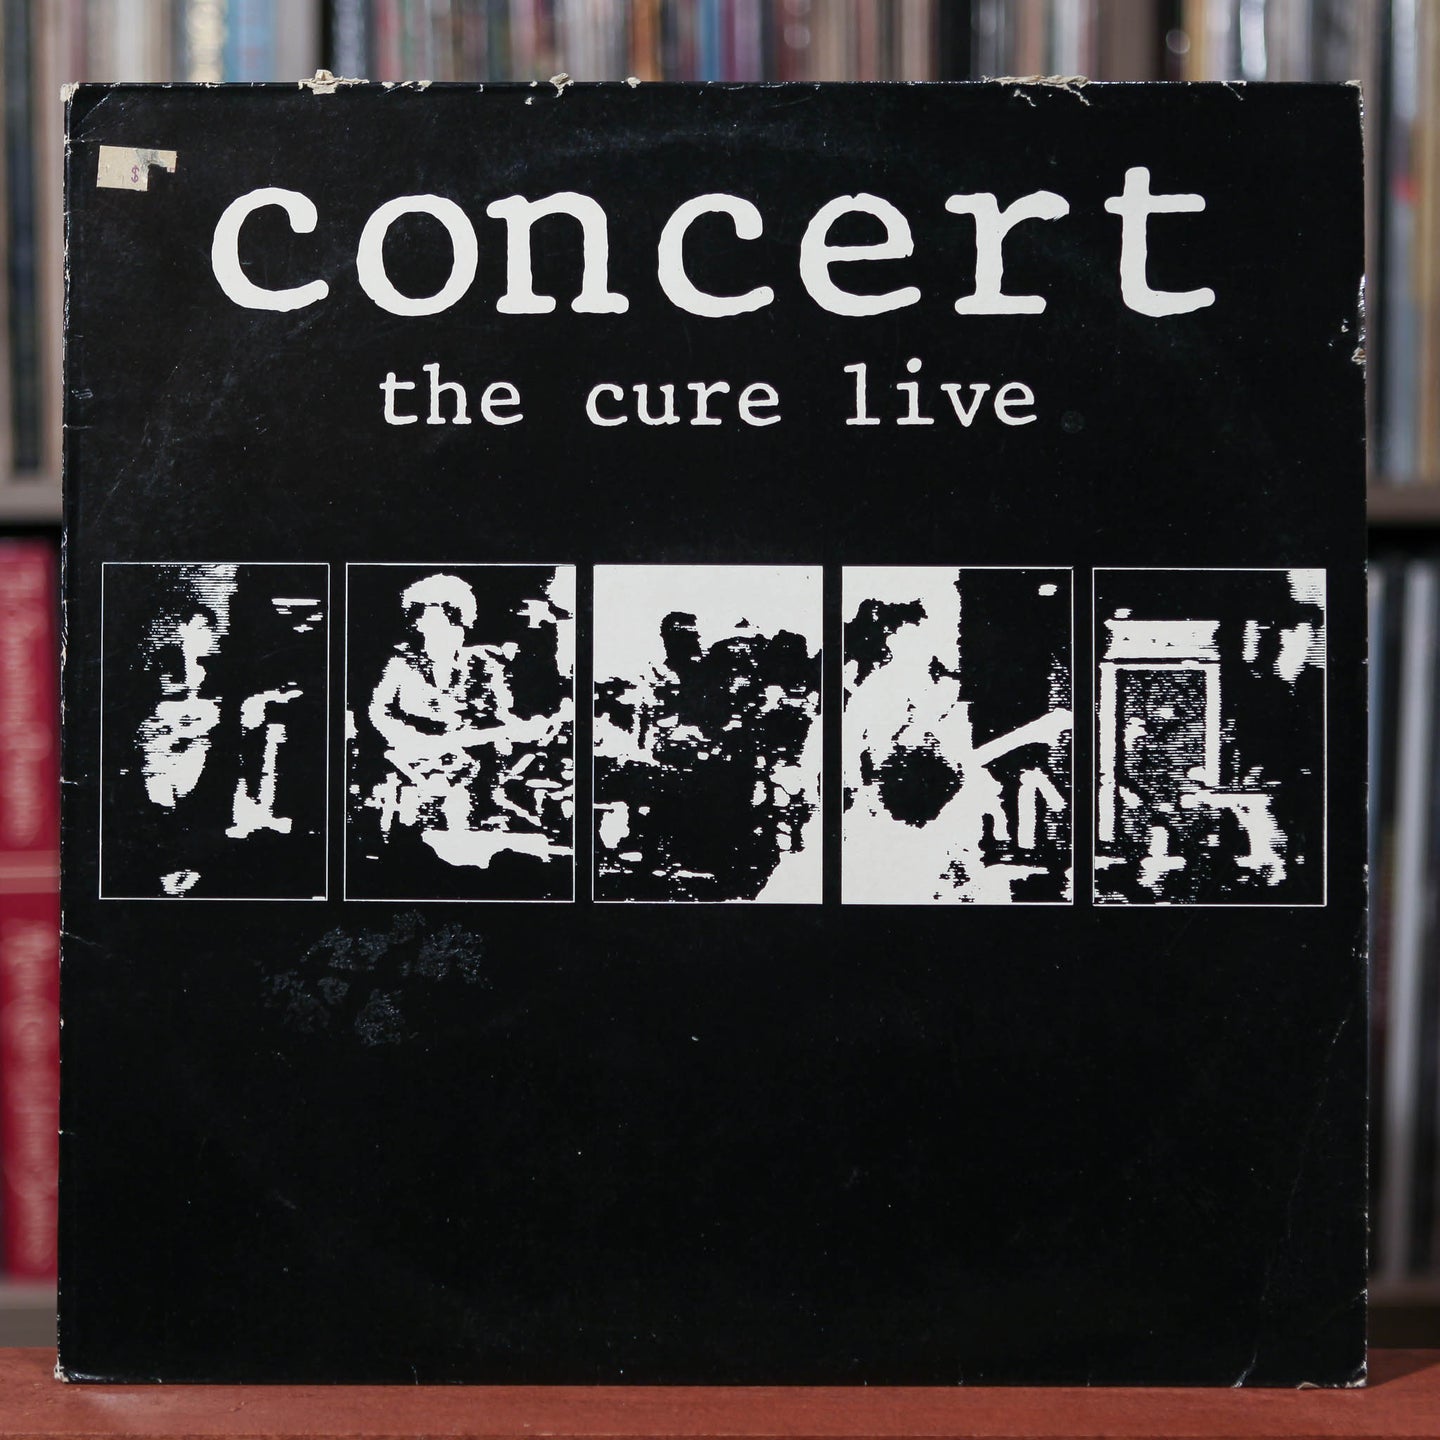 The Cure - Concert-The Cure Live - UK Import - 1984 Fiction Records, VG/VG+